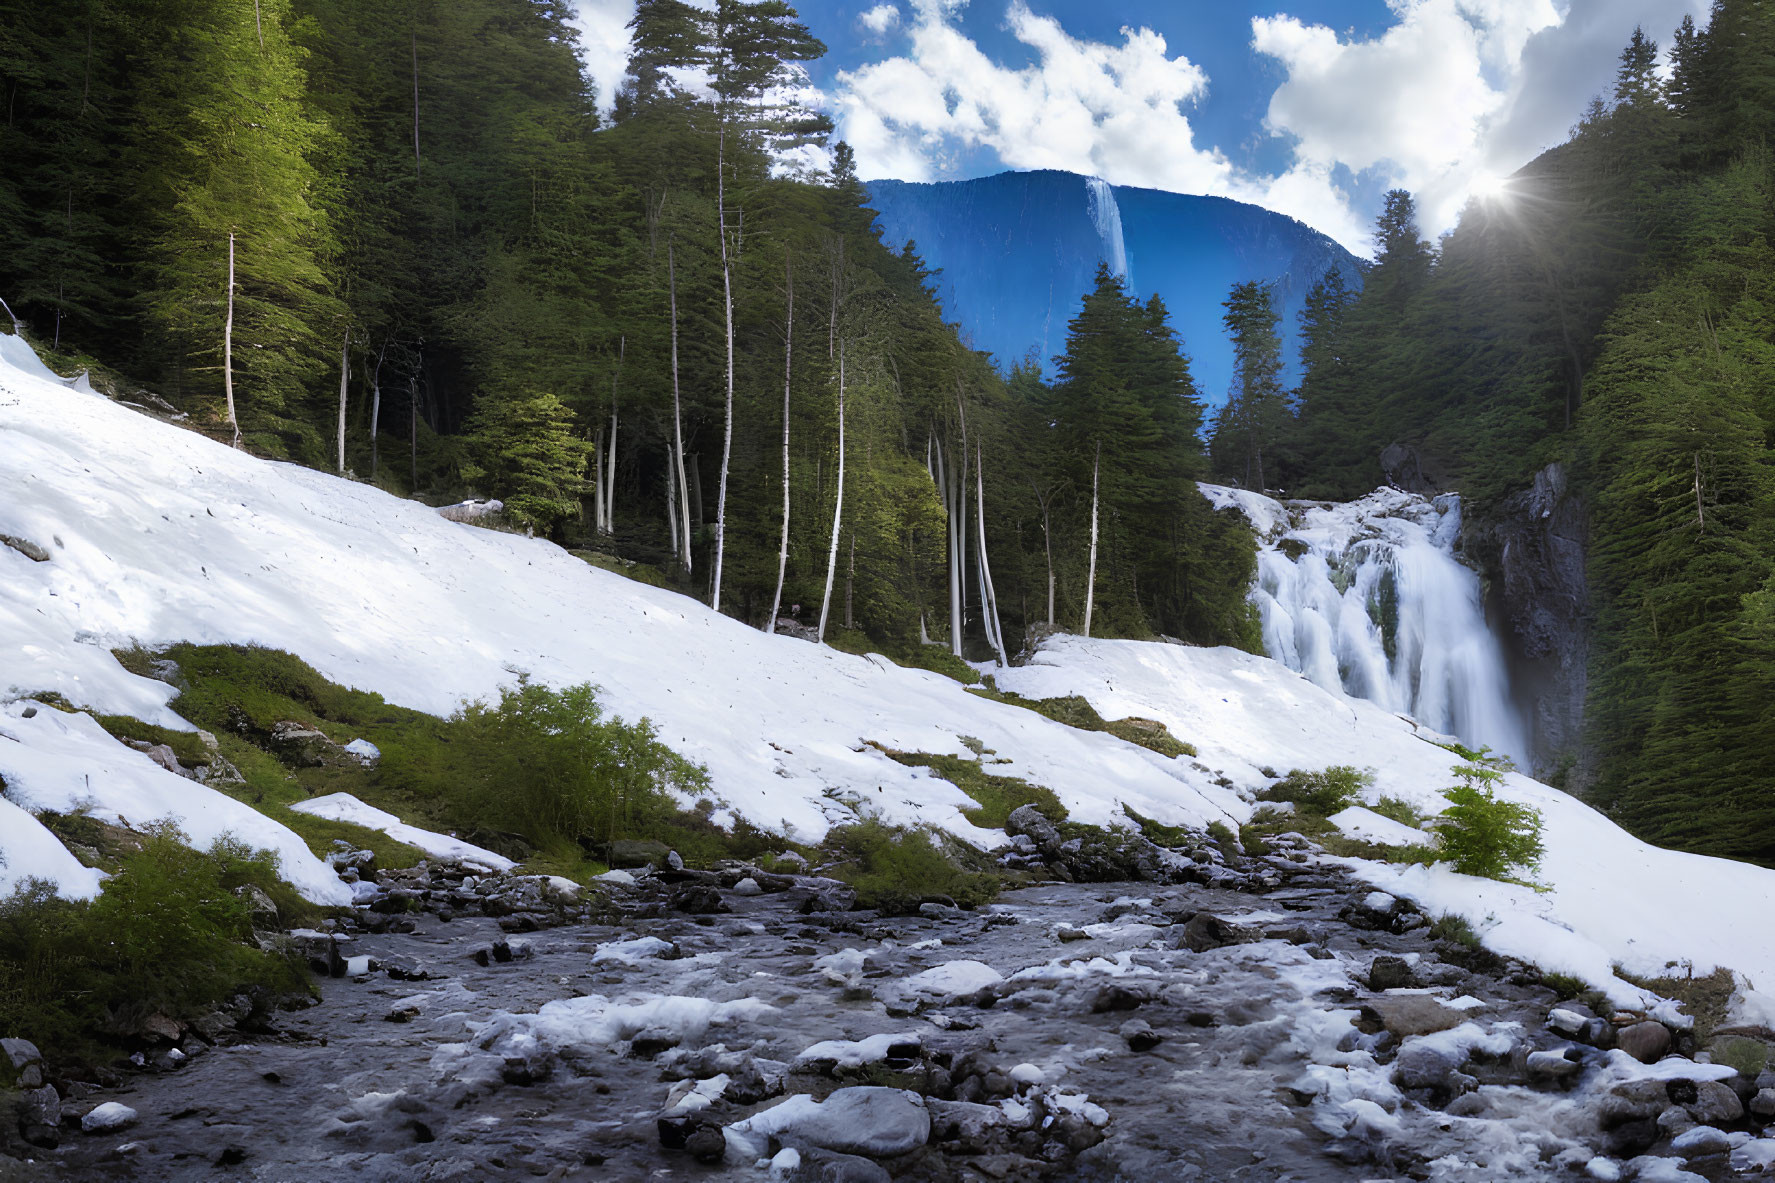 Winter landscape with snowy ground, rocky stream, waterfall, evergreen trees, and sunshine over mountain.